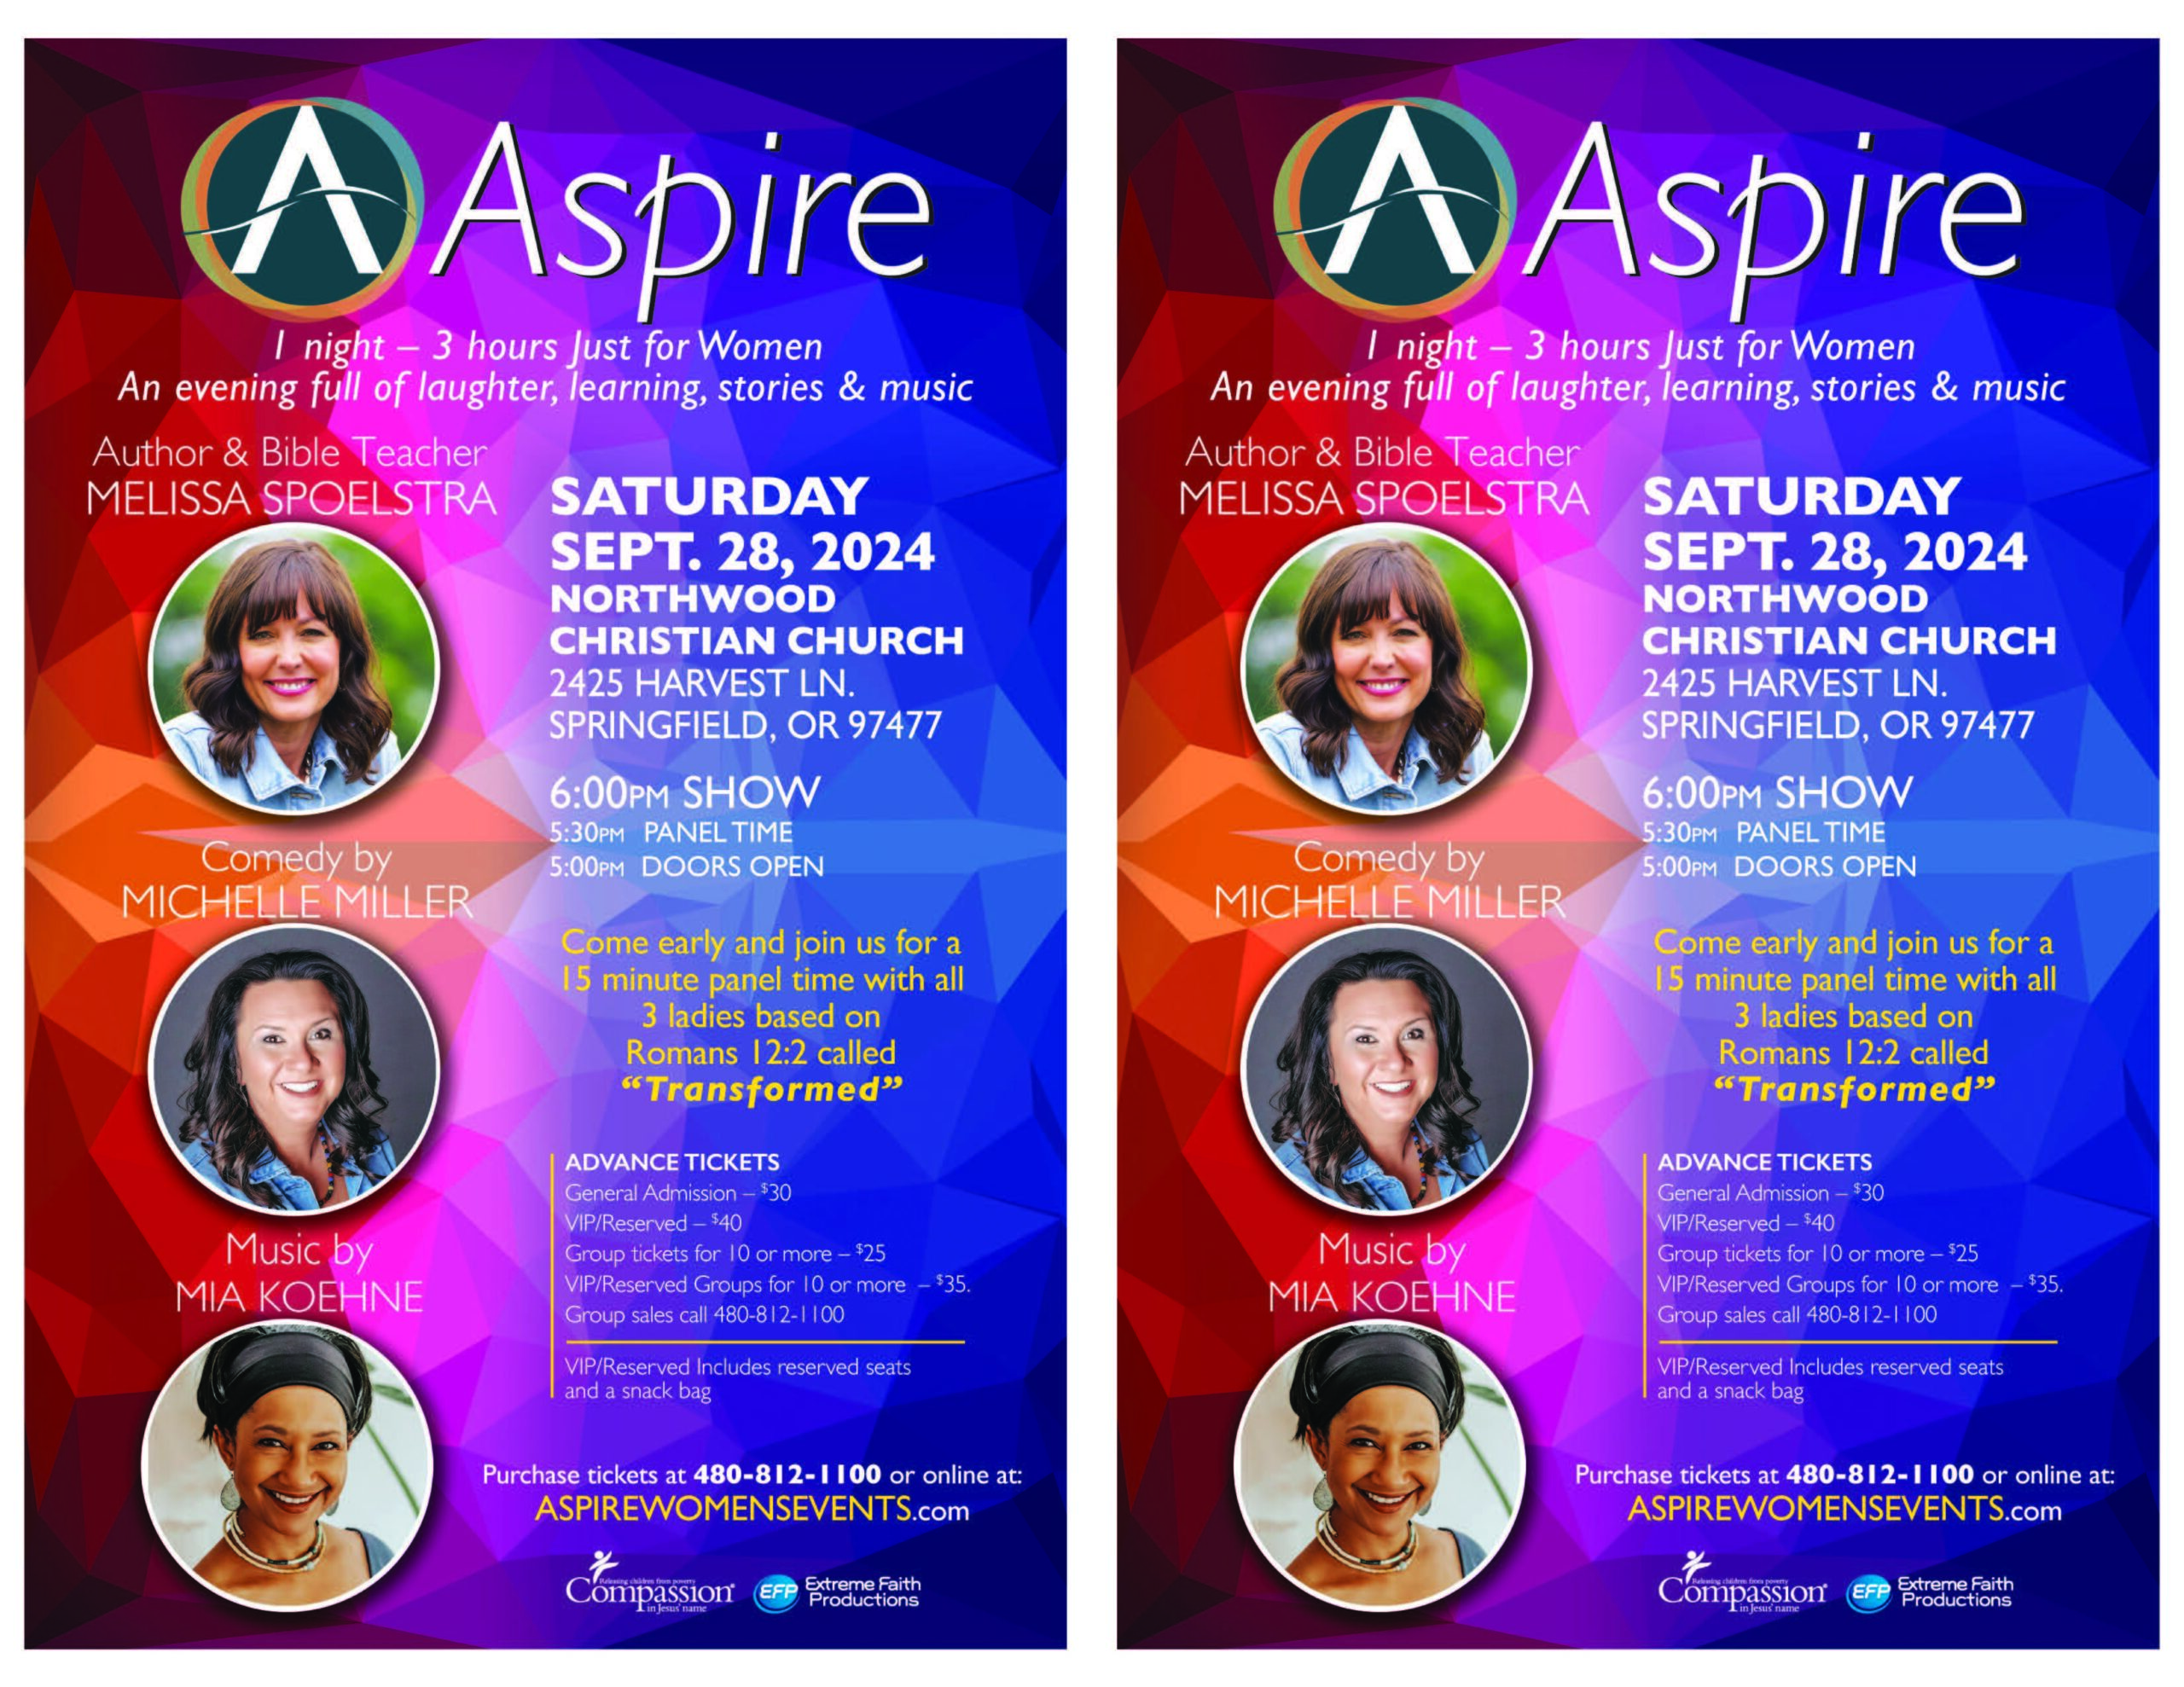 Aspire Sat Sept 28 Springfield OR 2UP